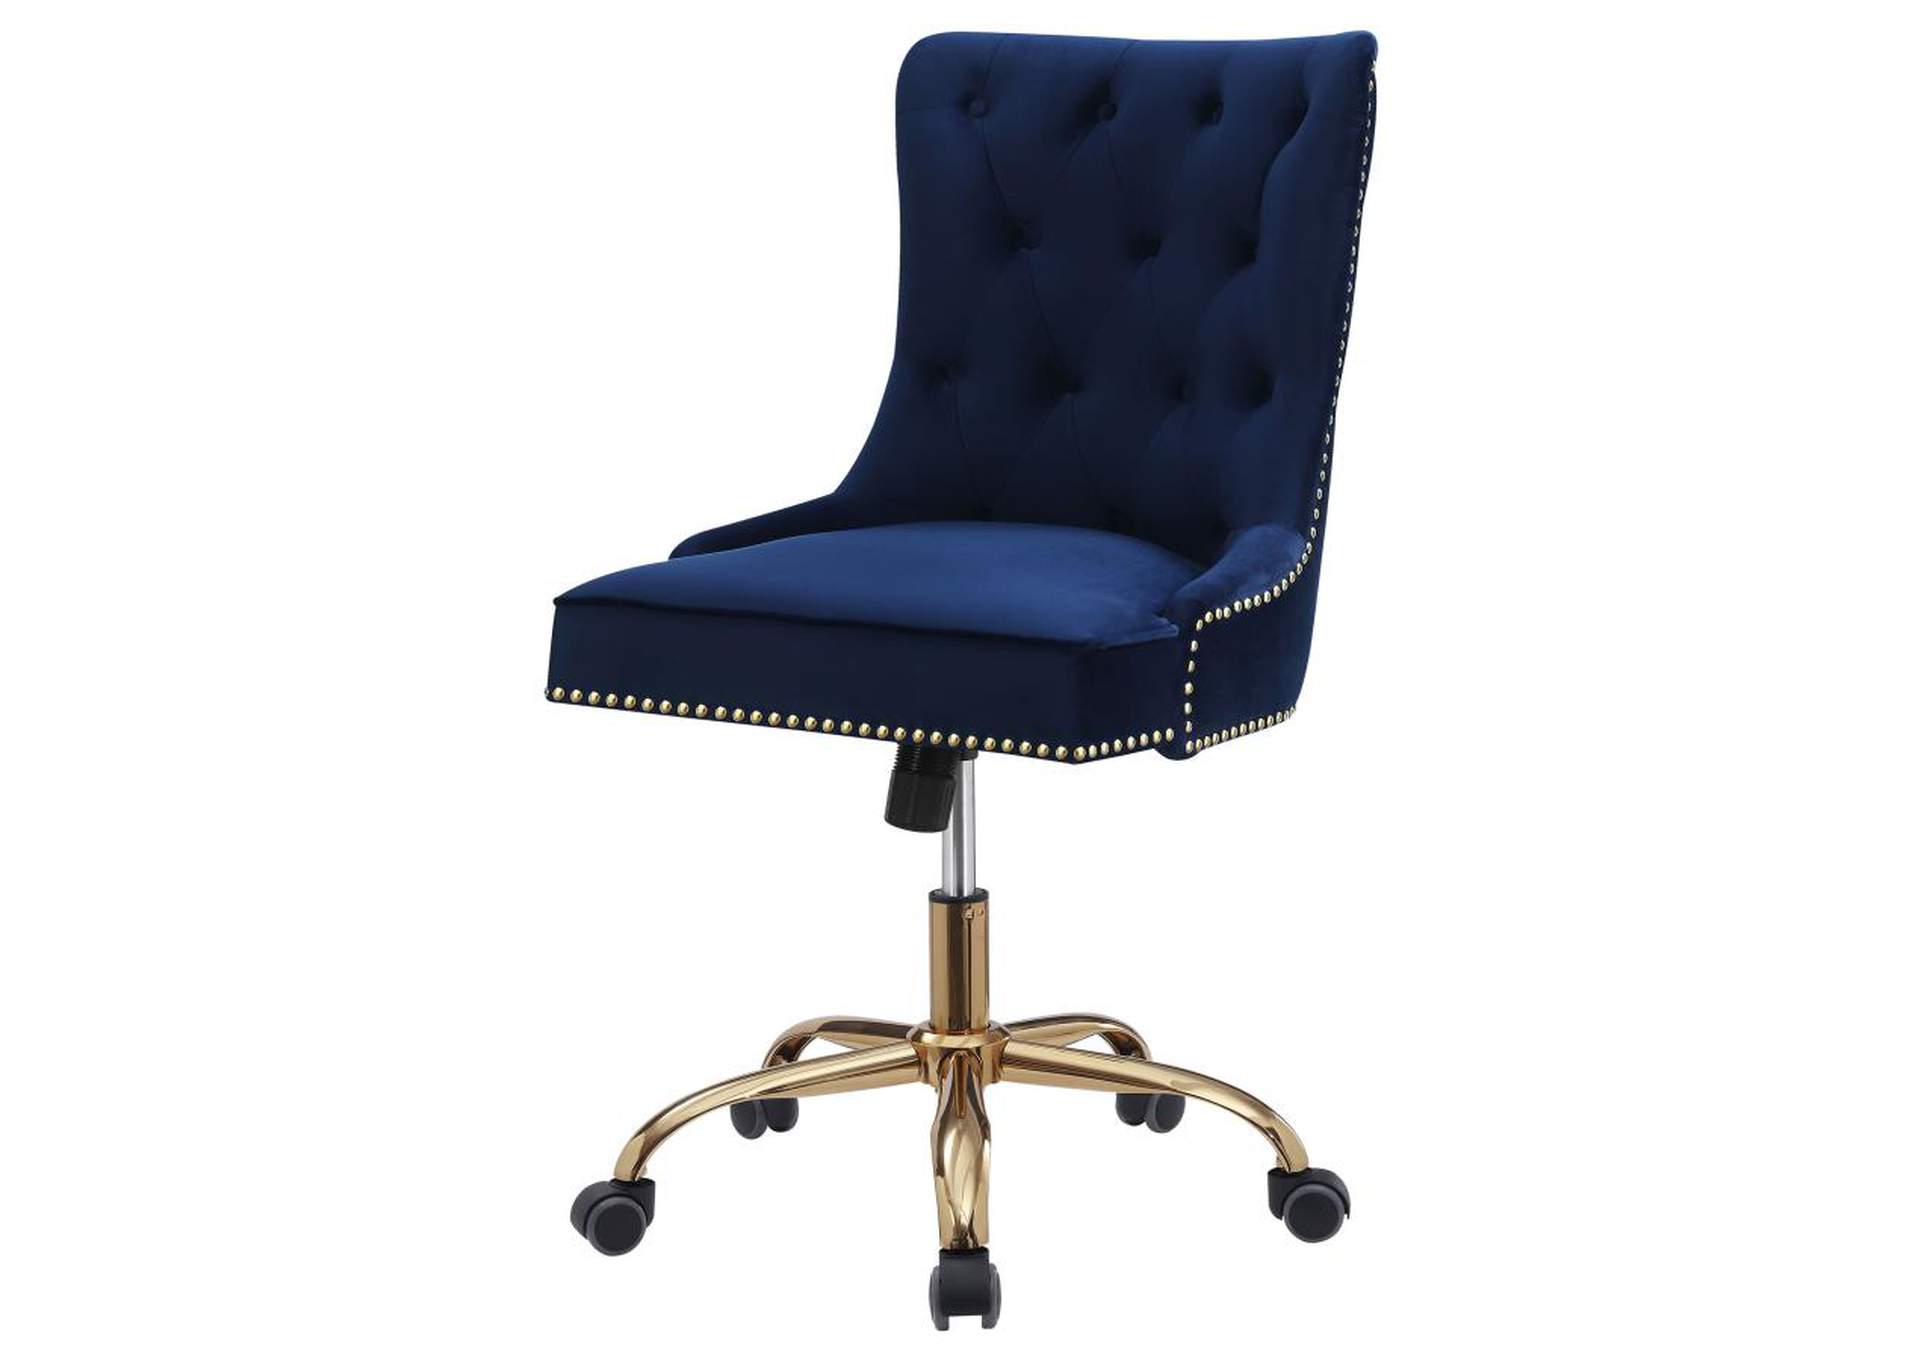 Upholstered Office Chair with Nailhead Blue and Brass,Coaster Furniture